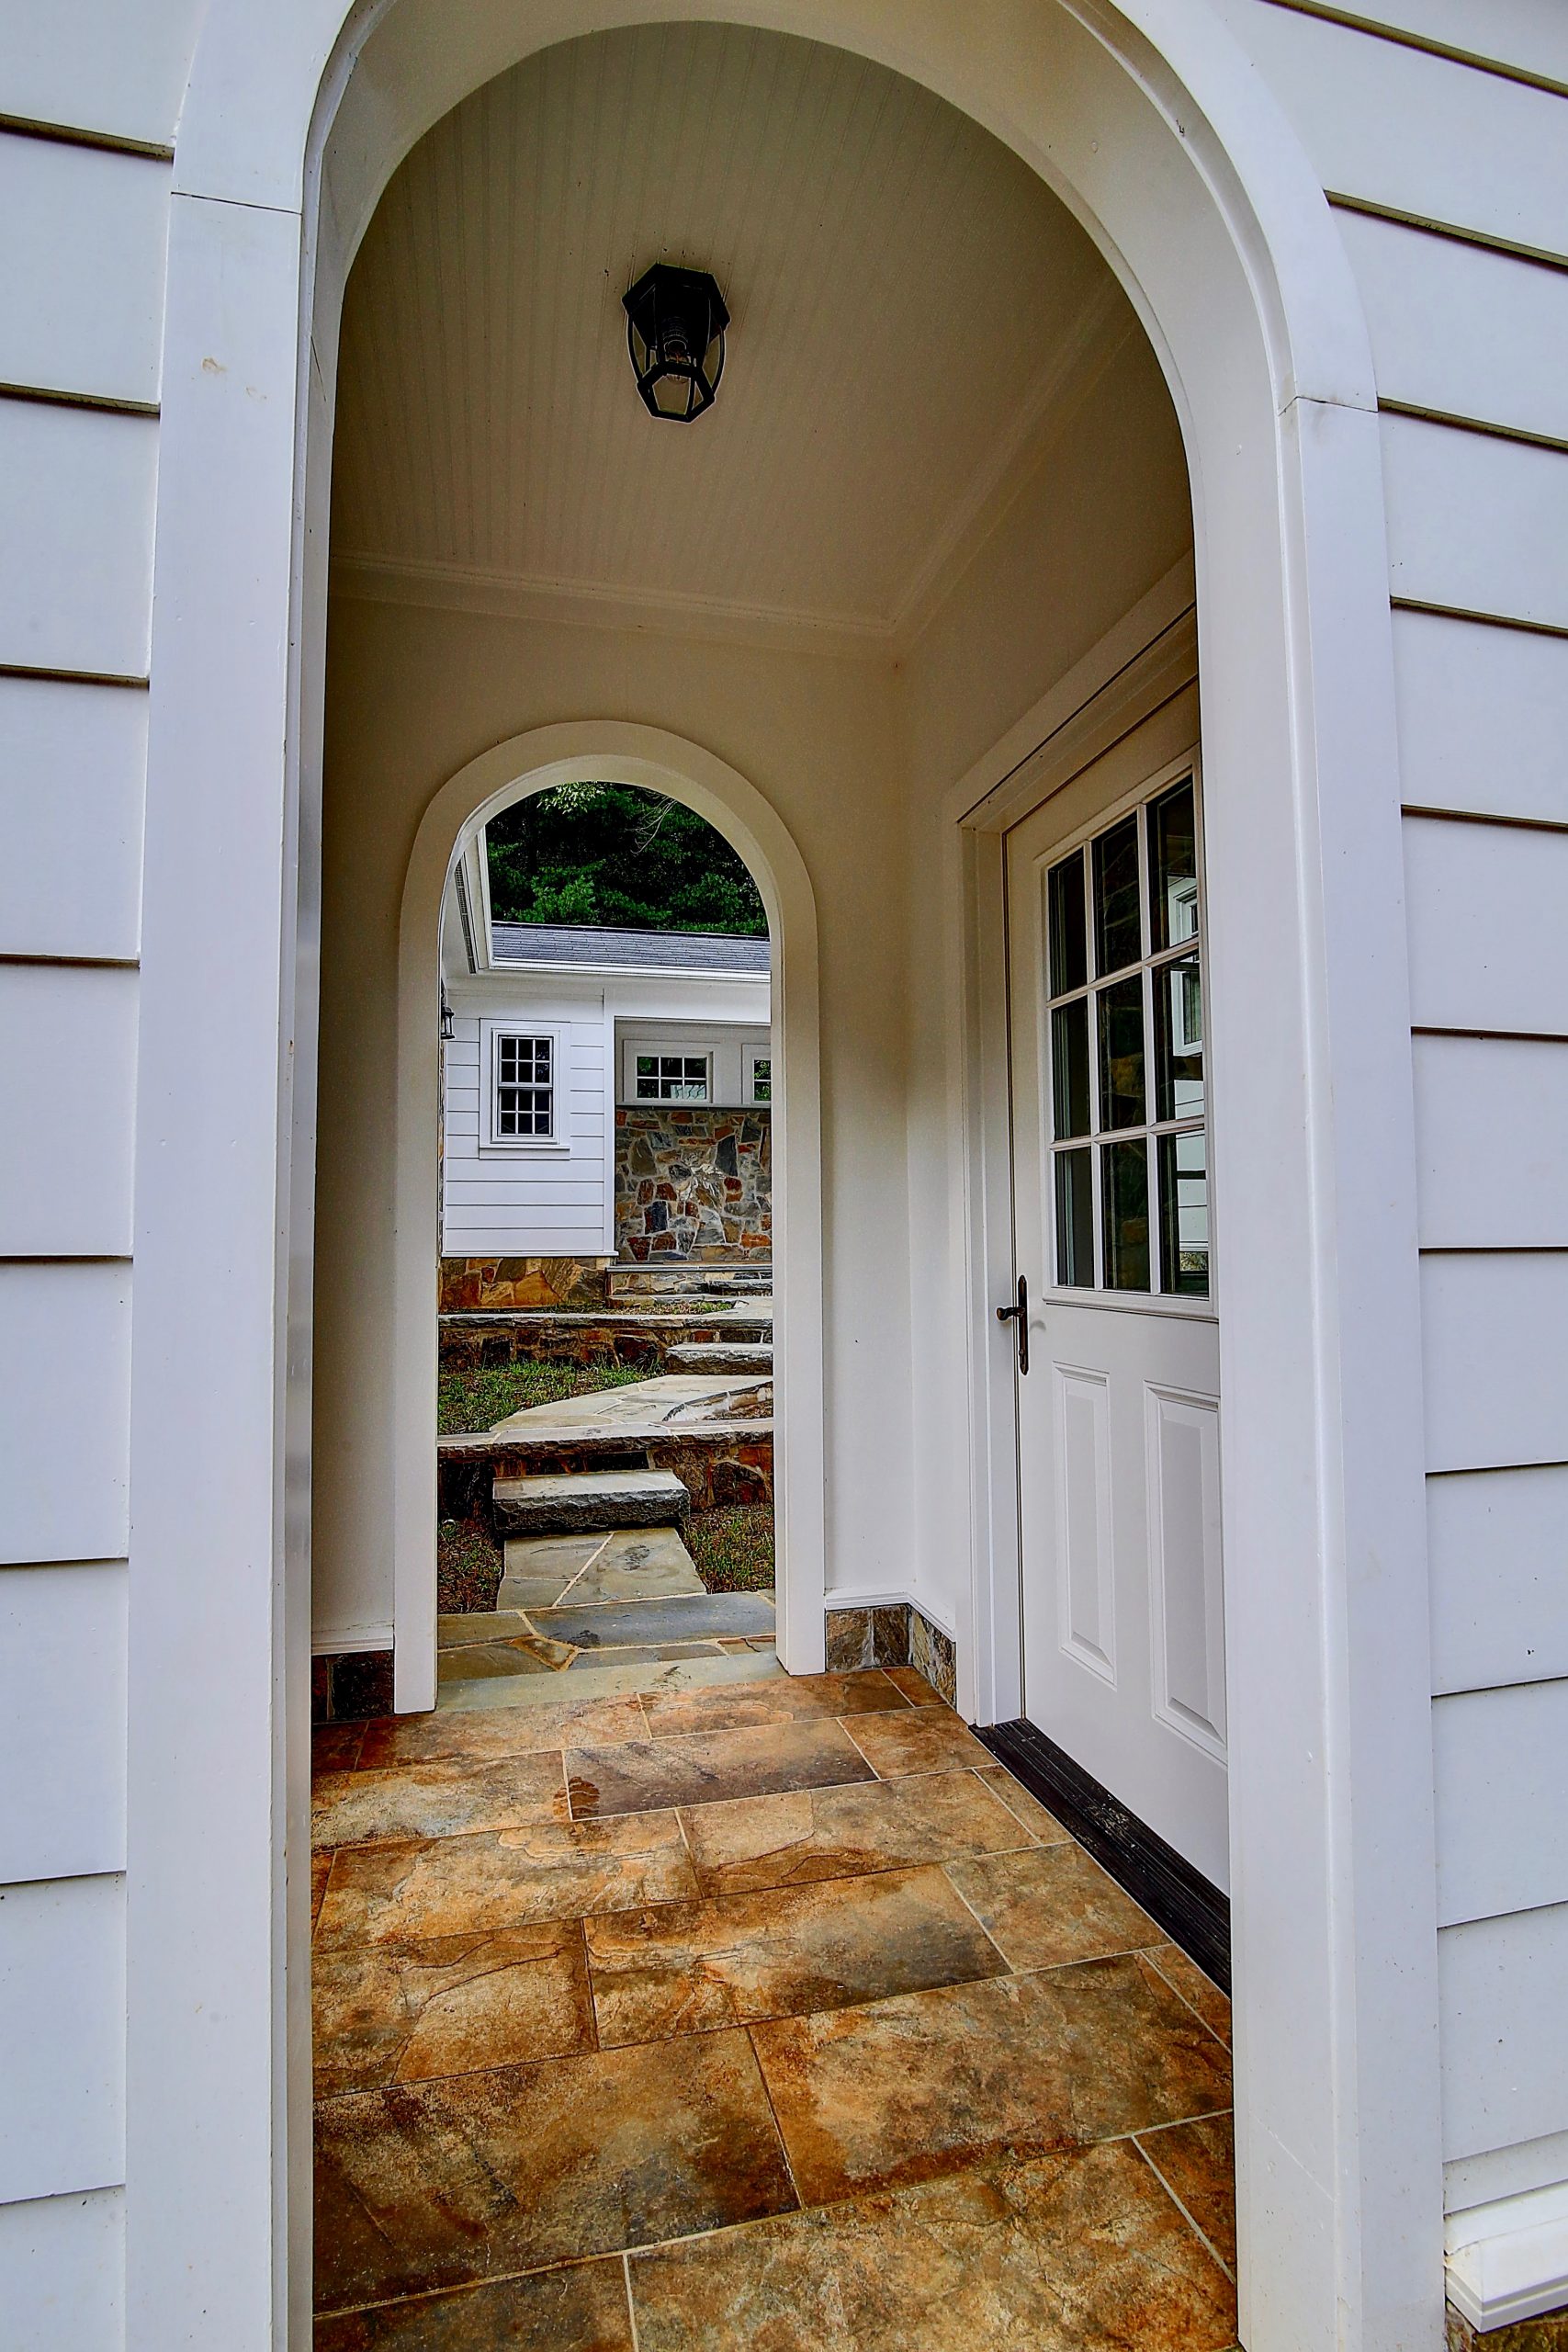 Exterior entryway with arched doorways and tiled stone floor